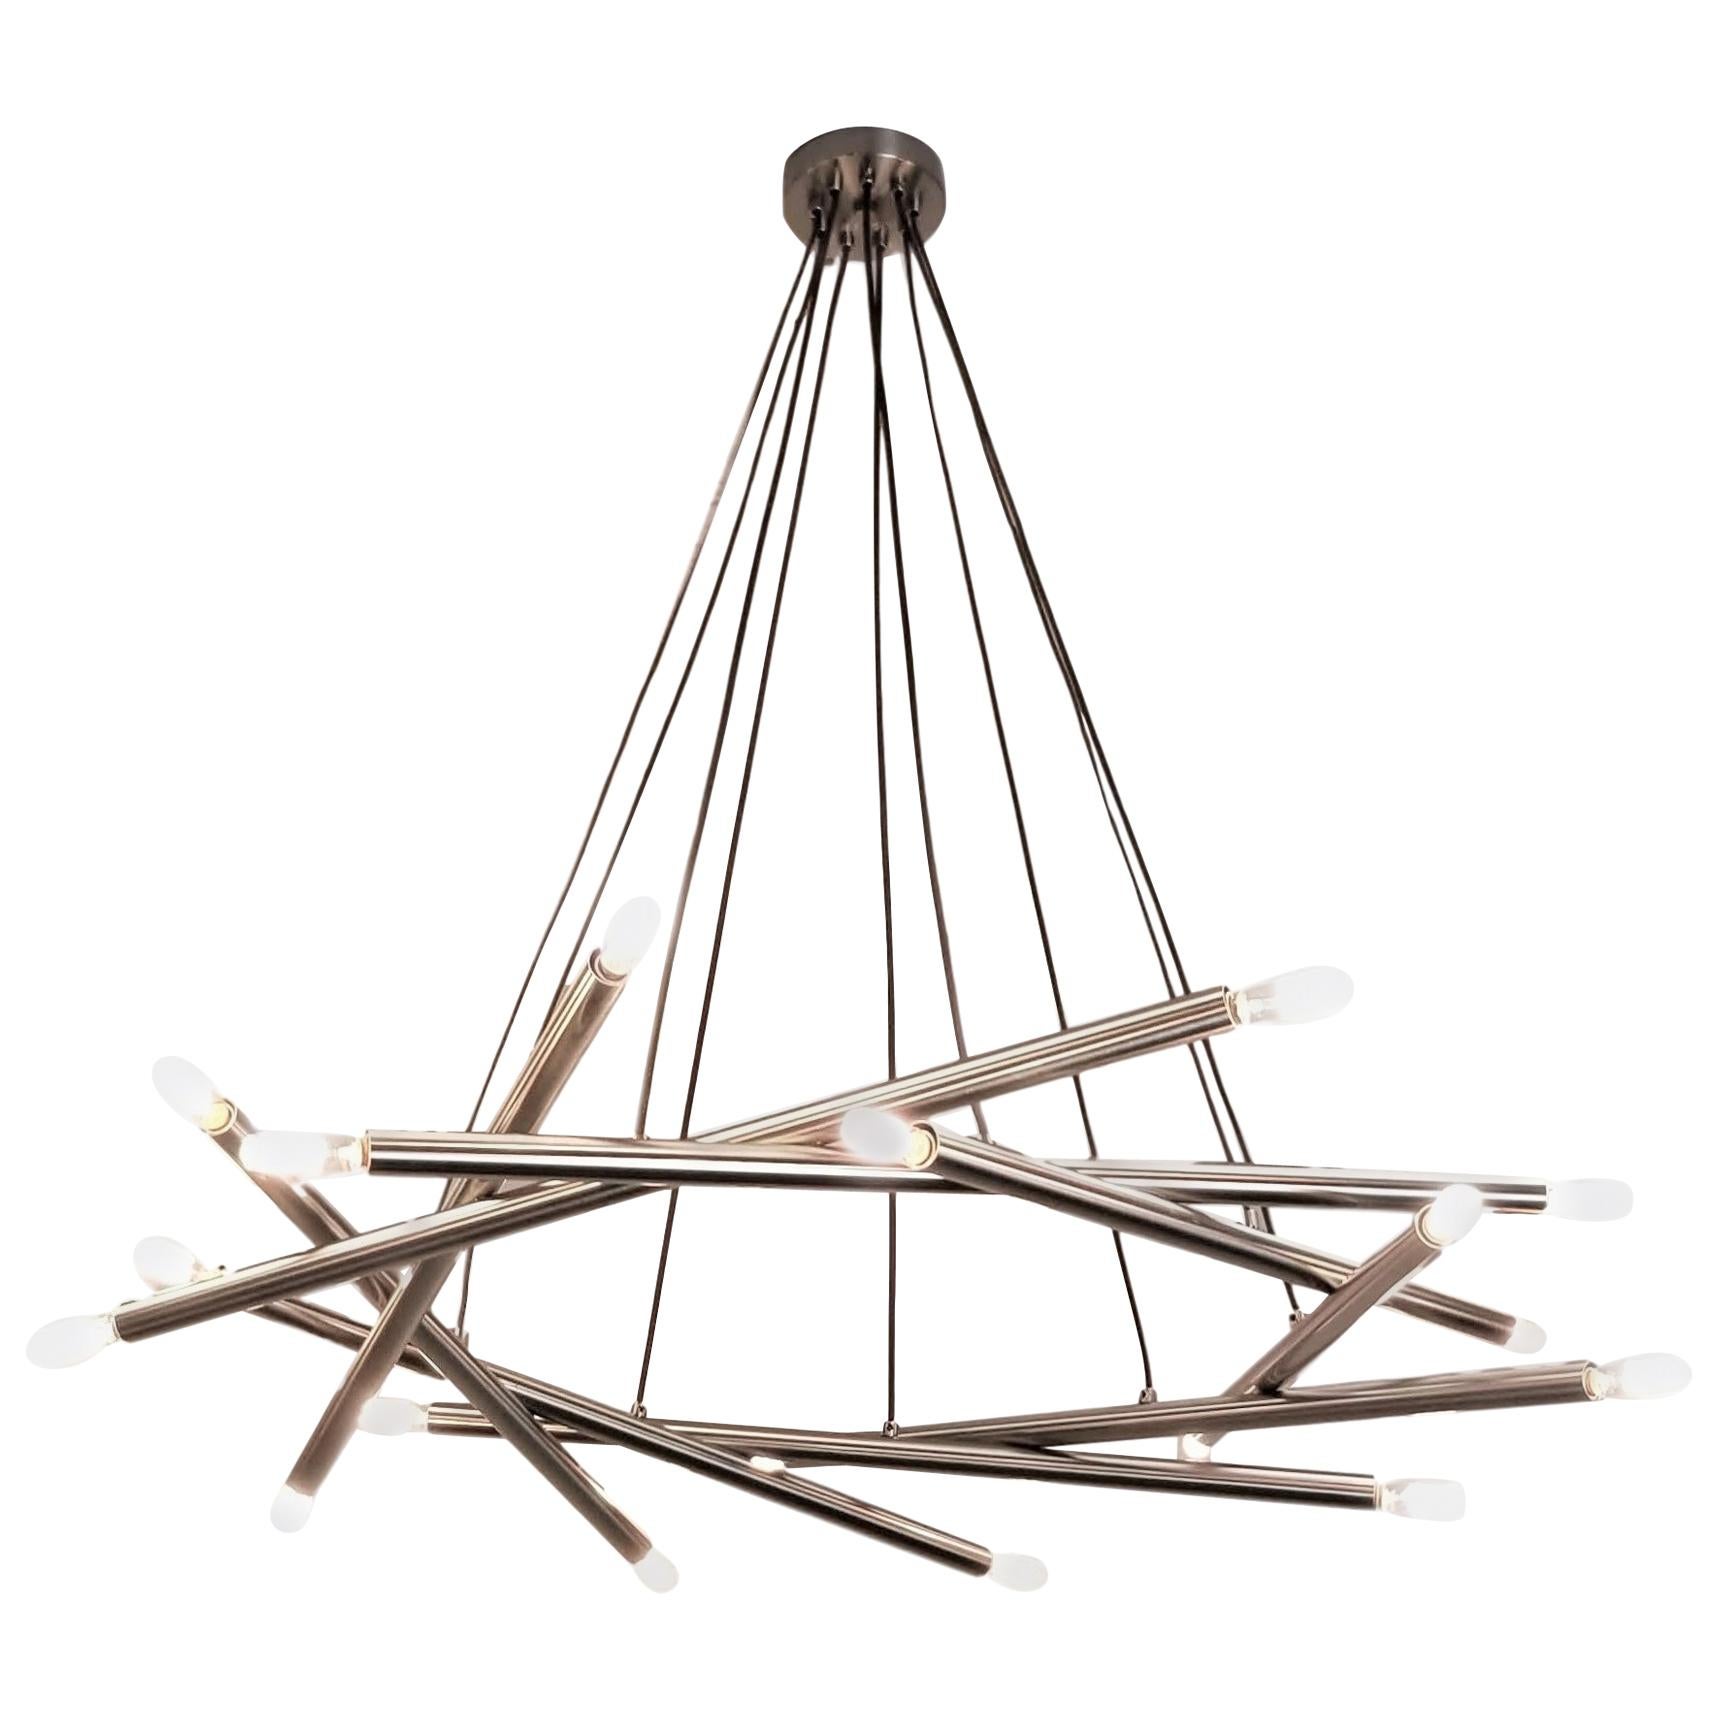 Contemporary "Polaris" Chandelier in Brushed Nickel by Blueprint Lighting, 2018